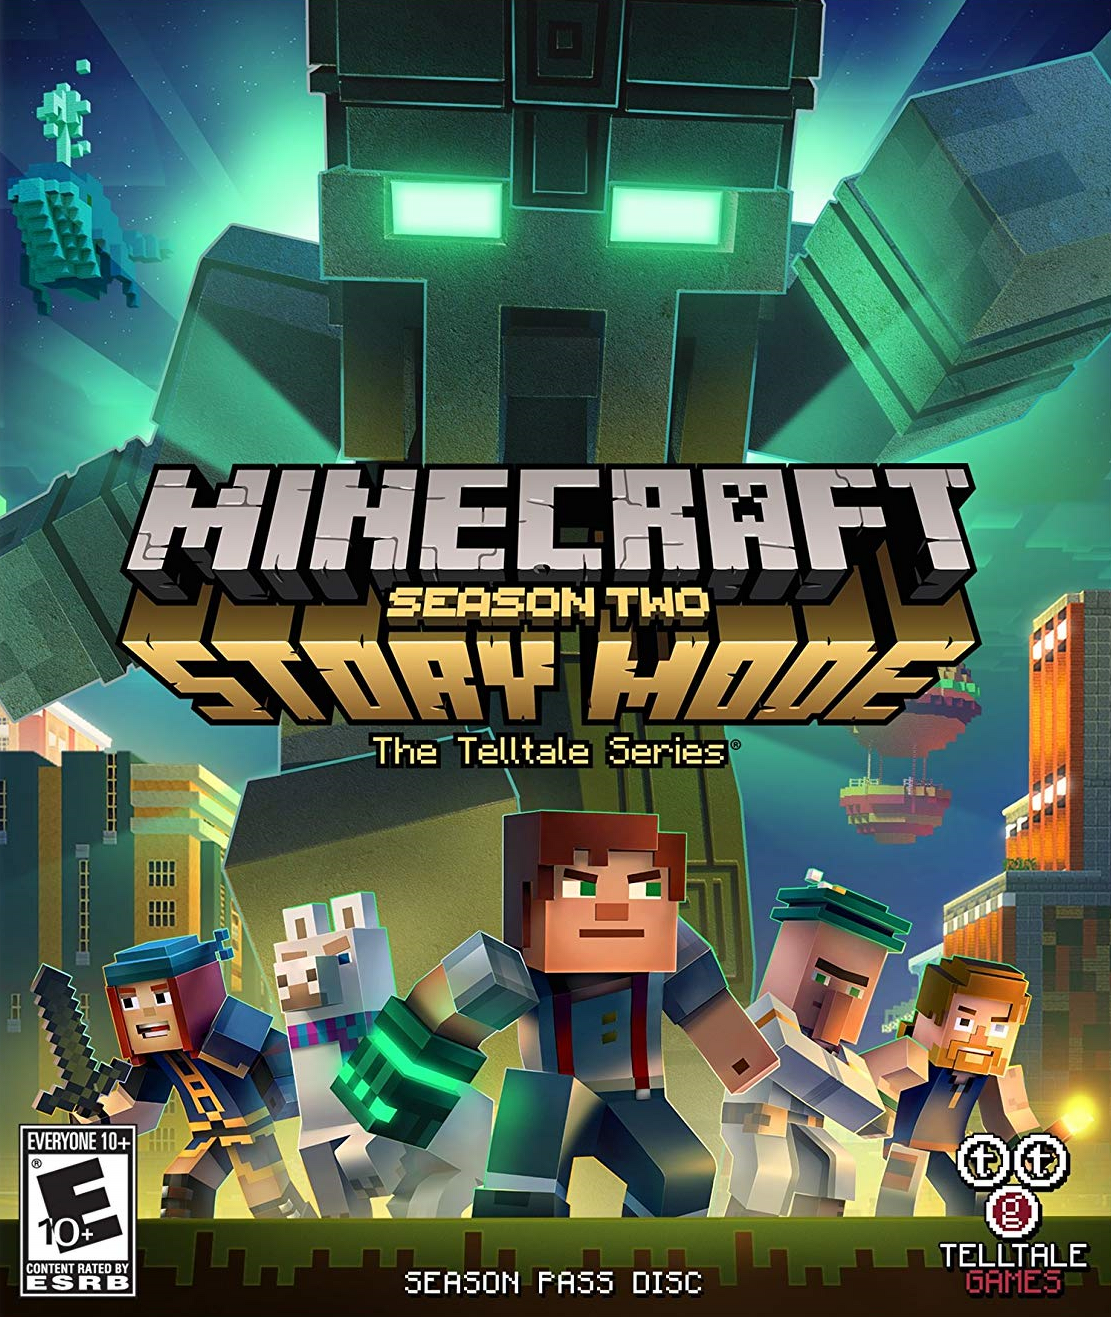 Steam Community :: Video :: Minecraft Story Mode : Special Episode